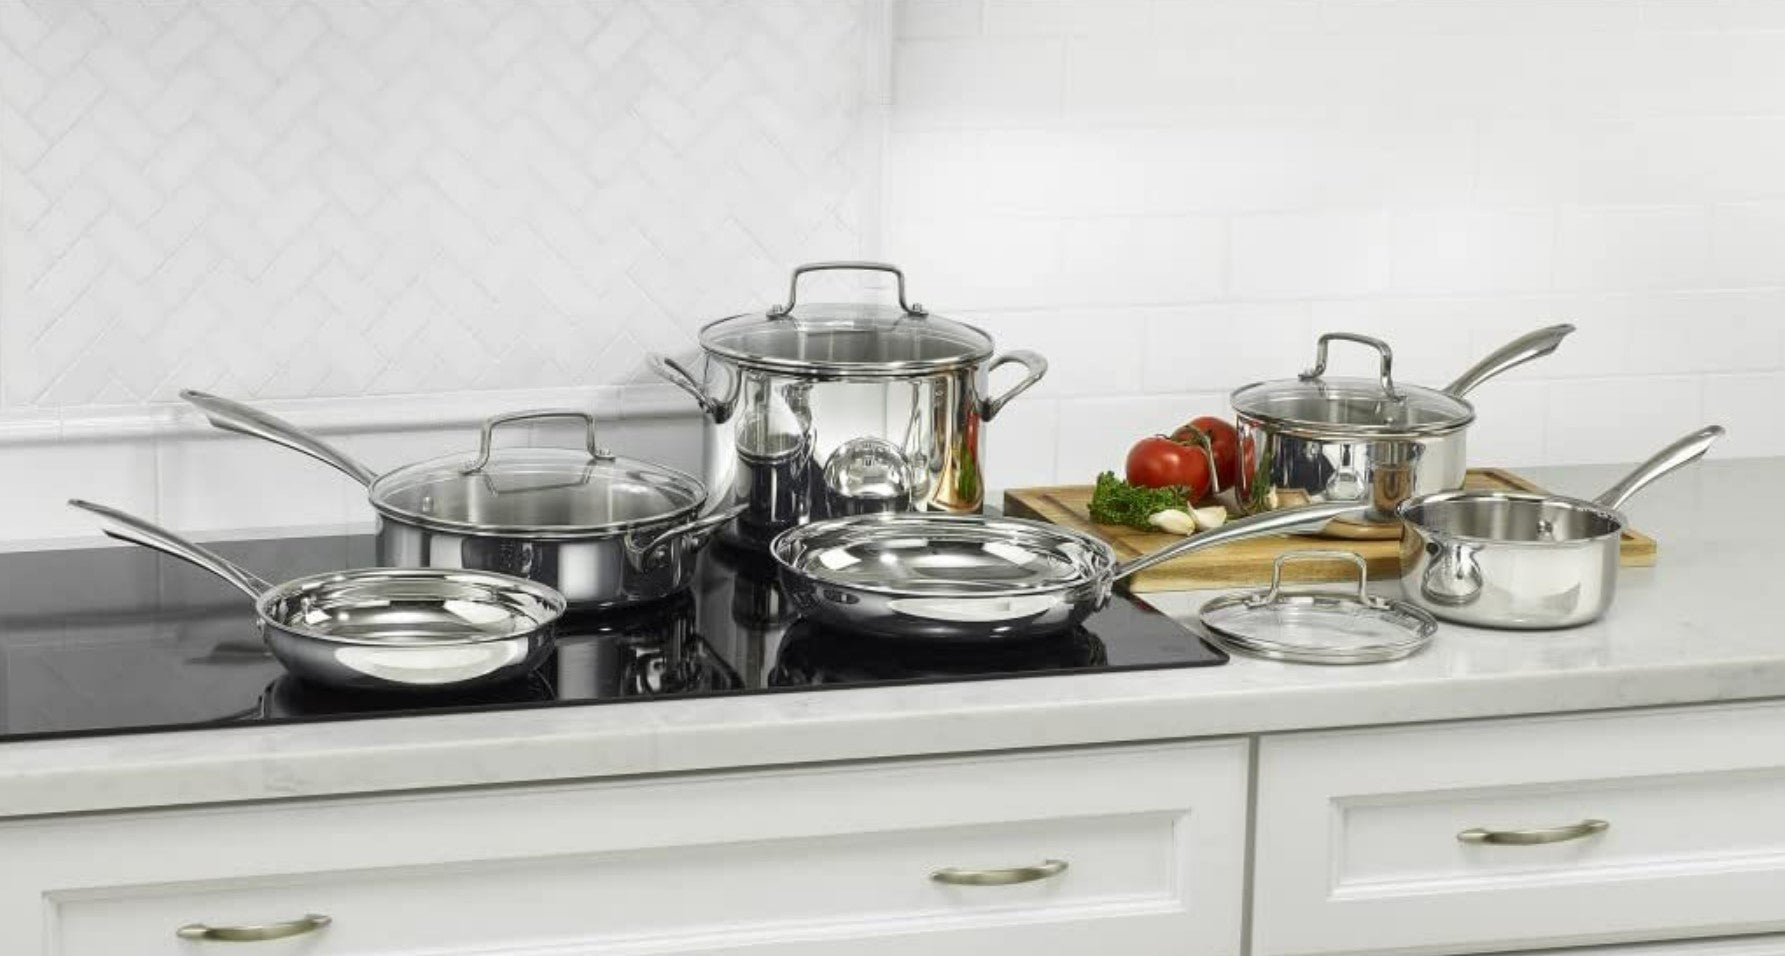 Cuisinart TPS-10 Tri-Ply Stainless Steel 10 Piece Cookware Set